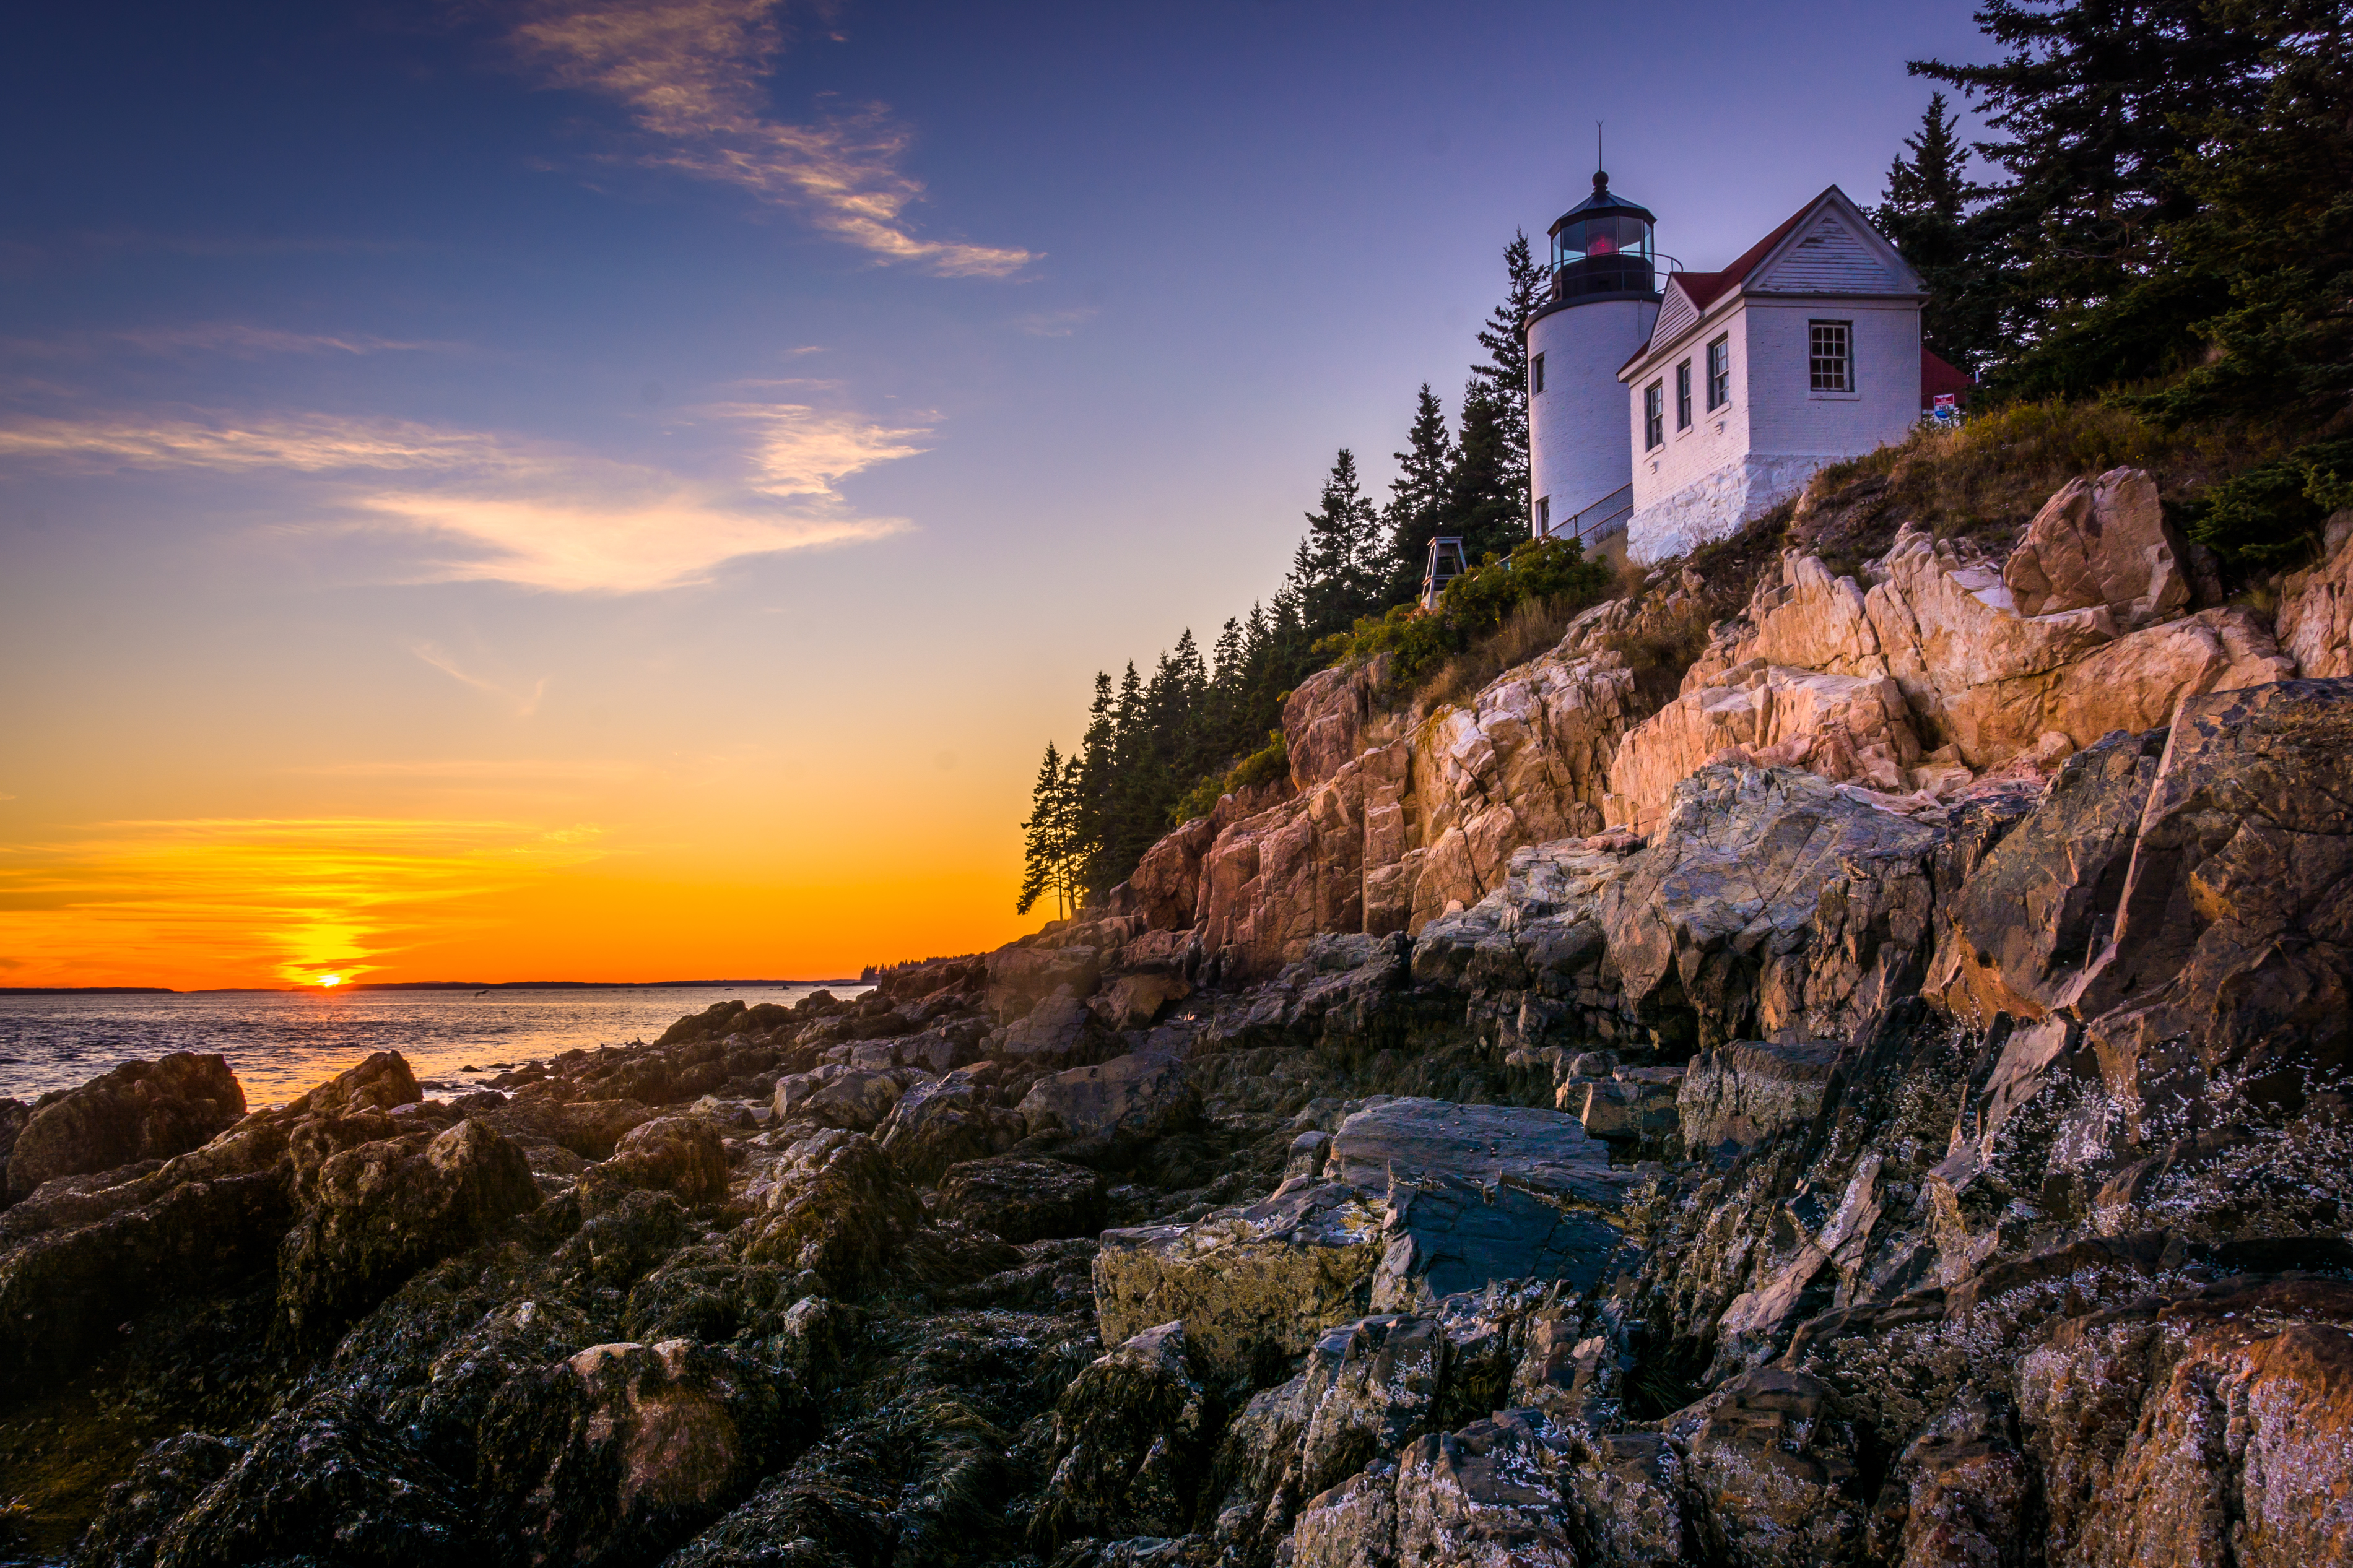 Experience an 8 Day Amazing Vacation in Maine with Family - Acadia National Park